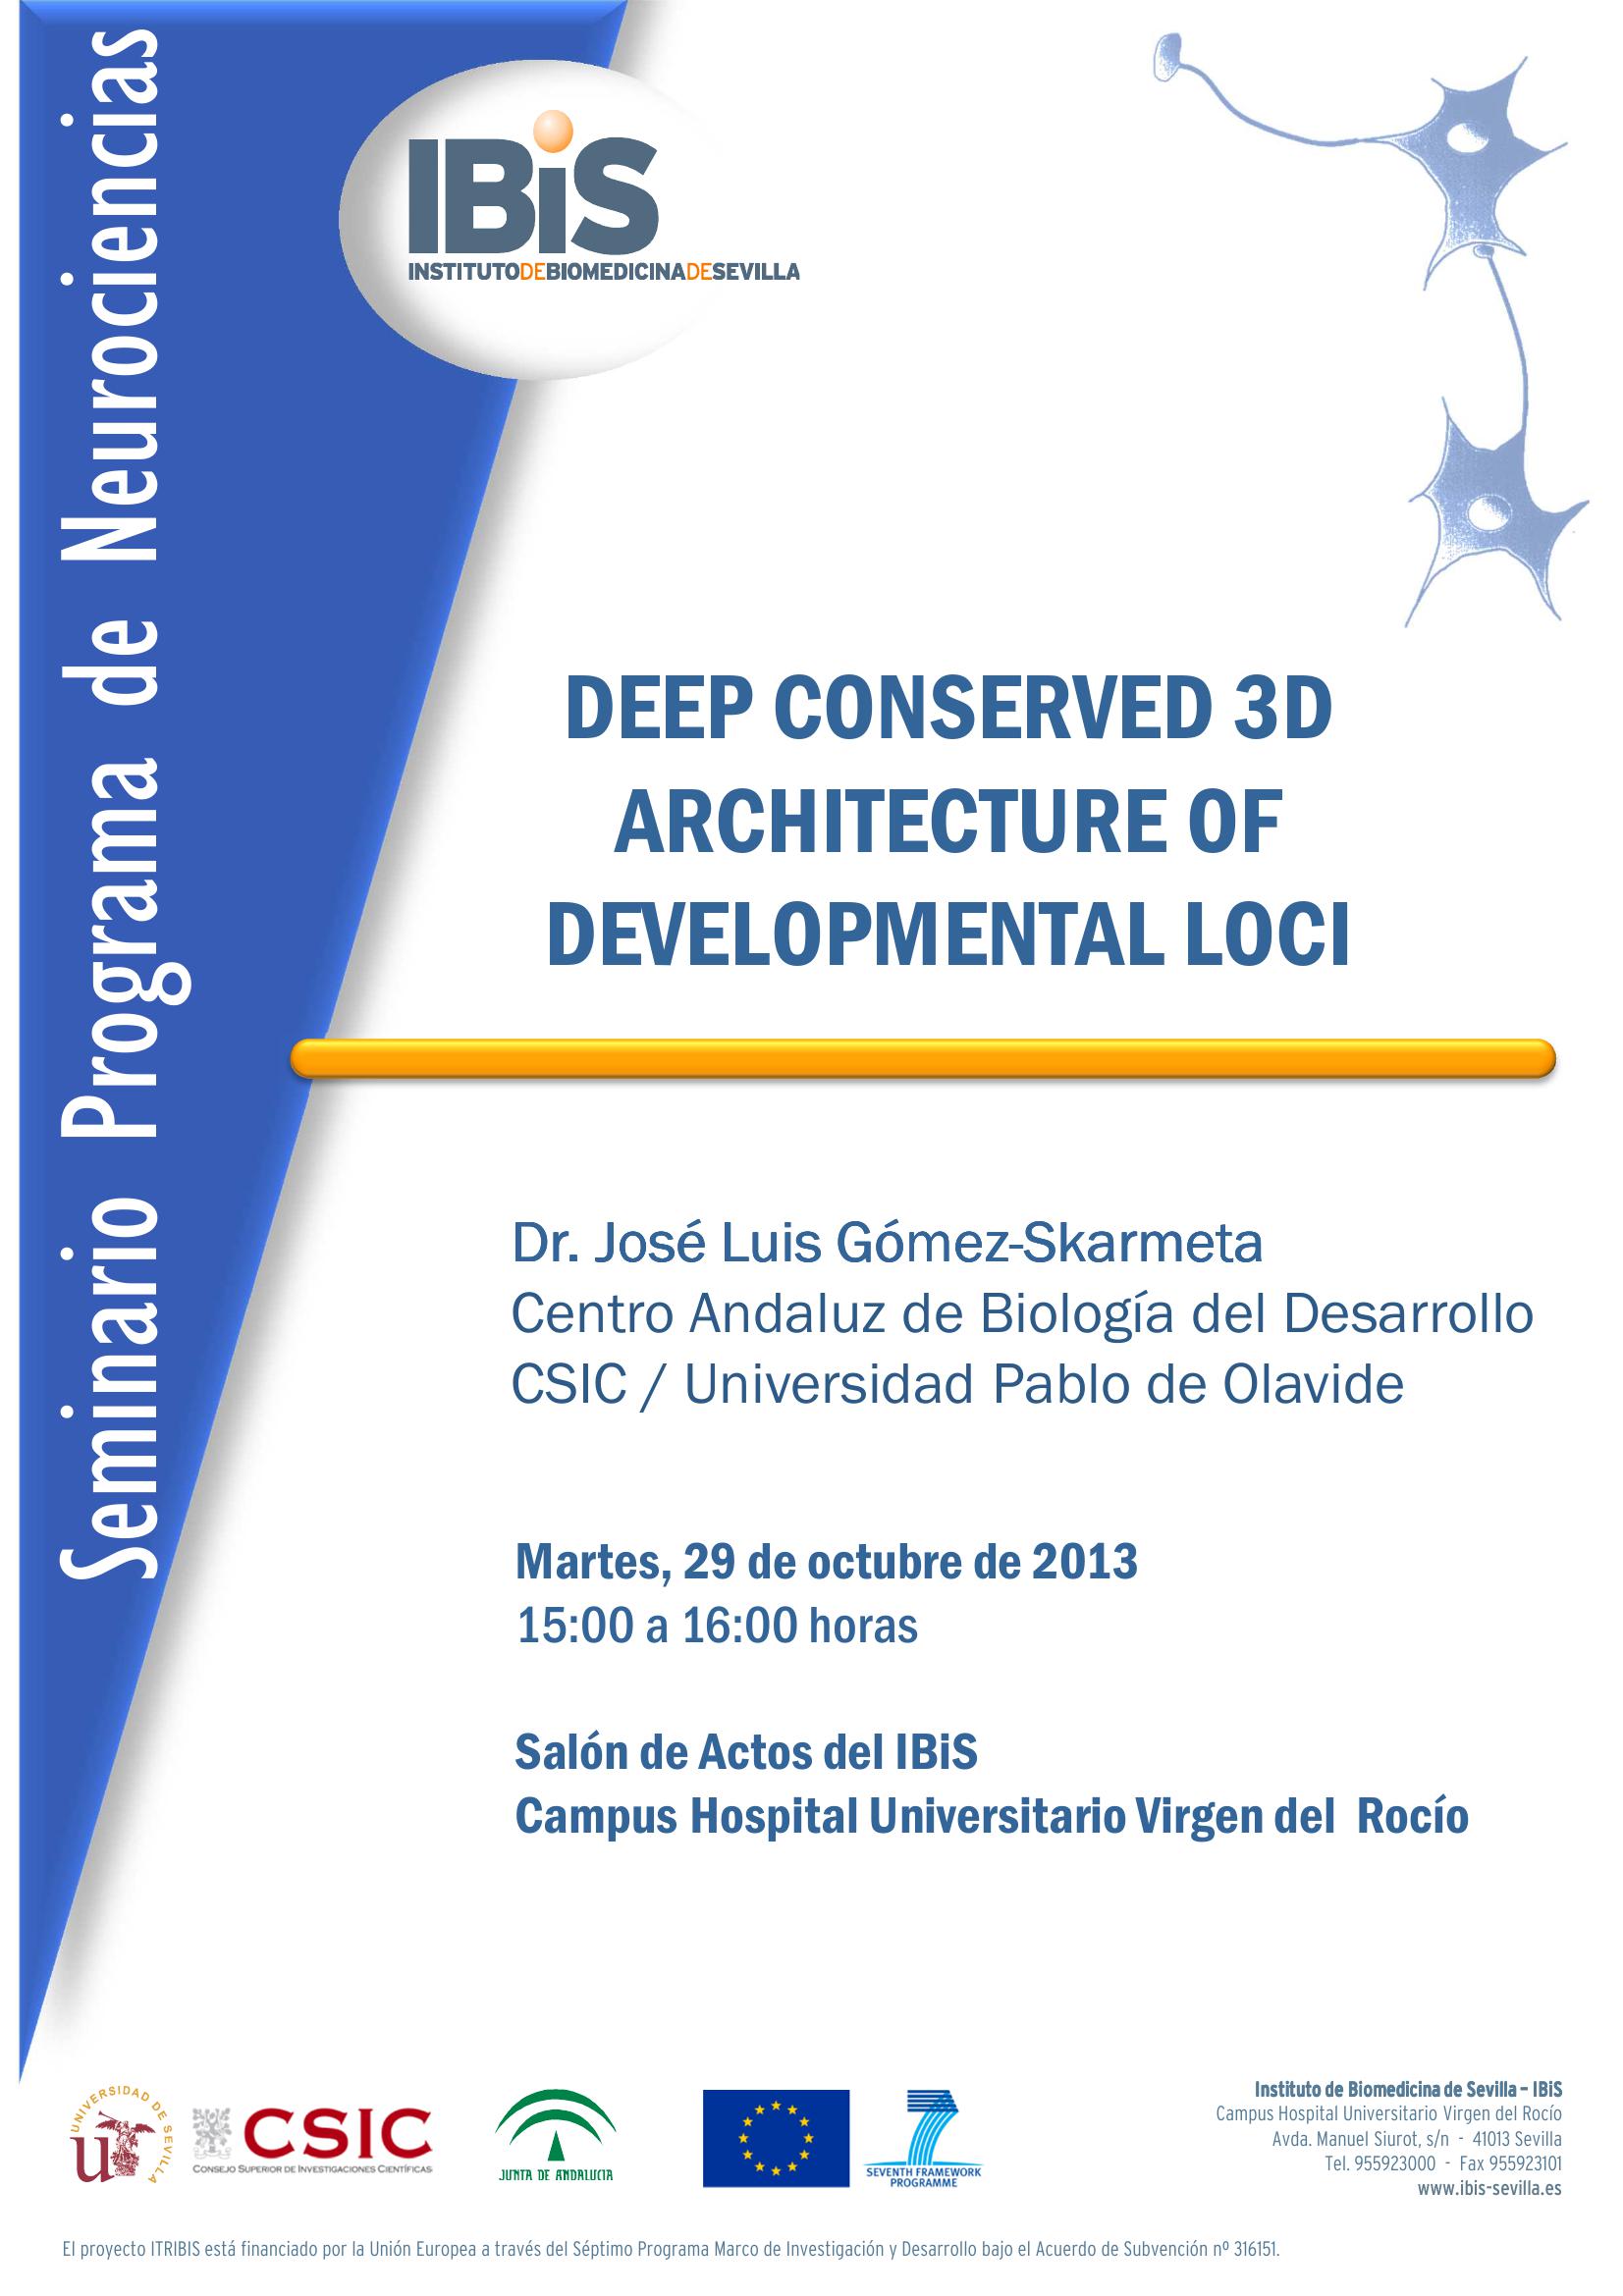 Poster: DEEP CONSERVED 3D ARCHITECTURE OF DEVELOPMENTAL LOCI